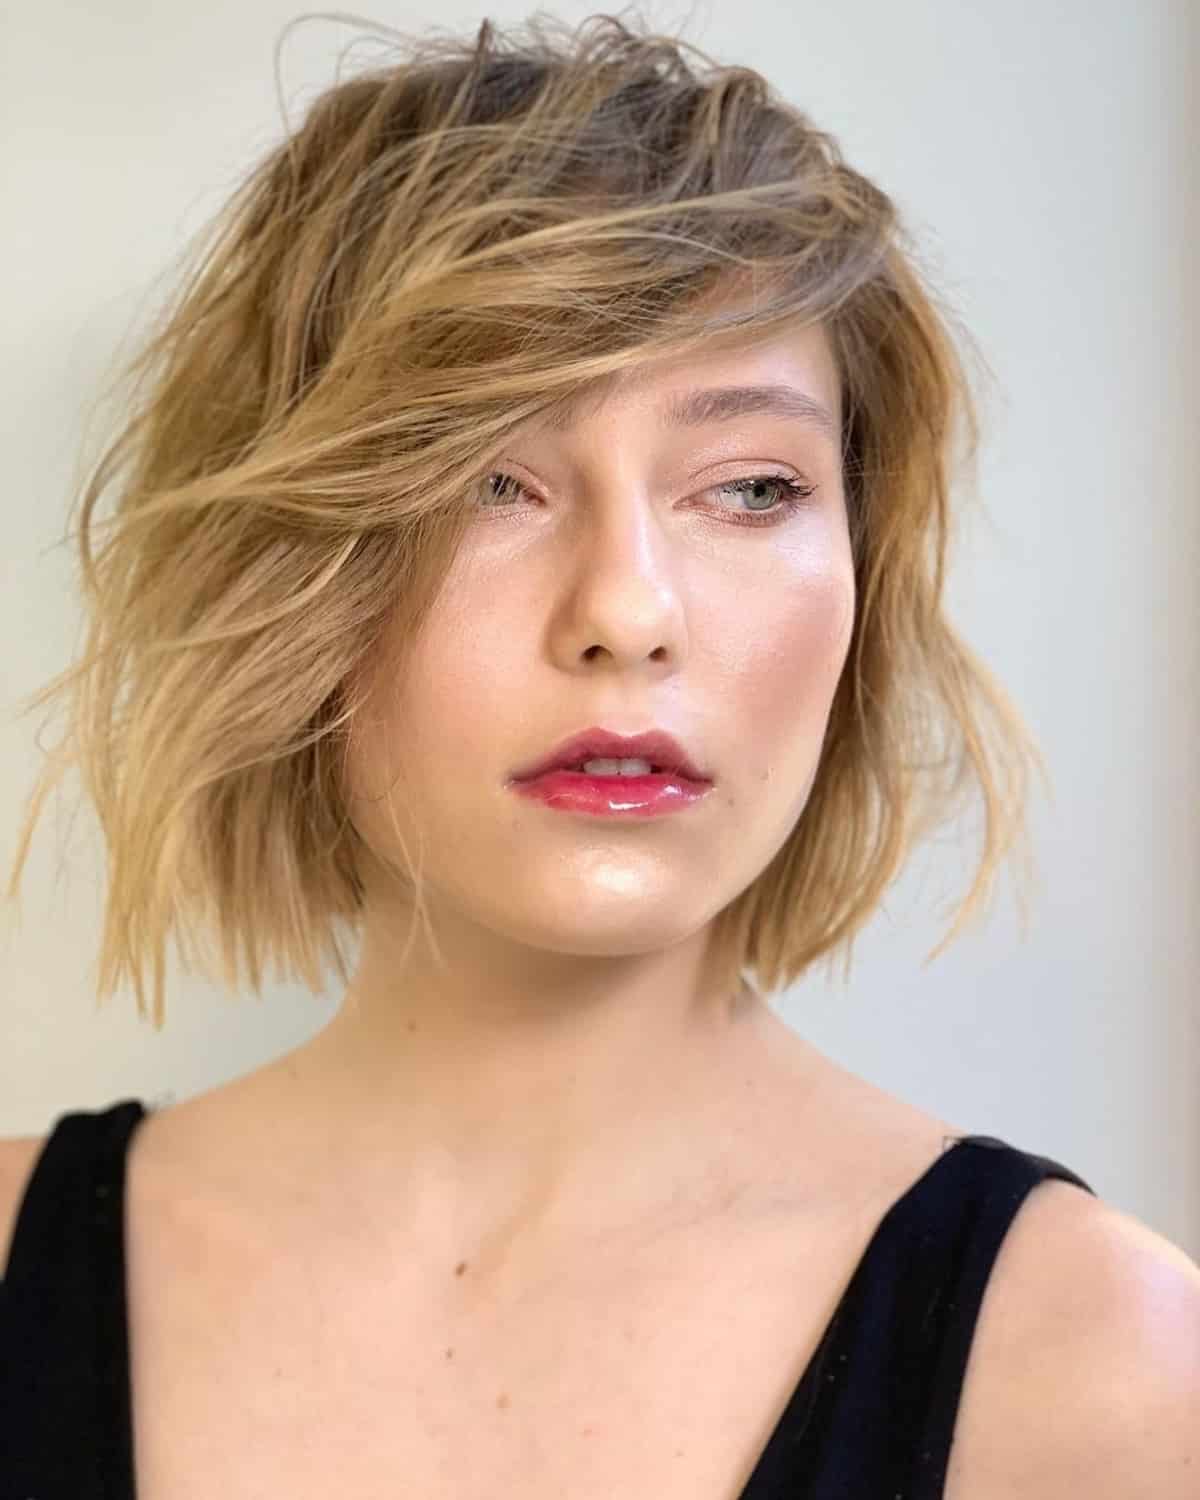 16 Trendy Blunt Bob with Bangs to Inspire Your Next Chop